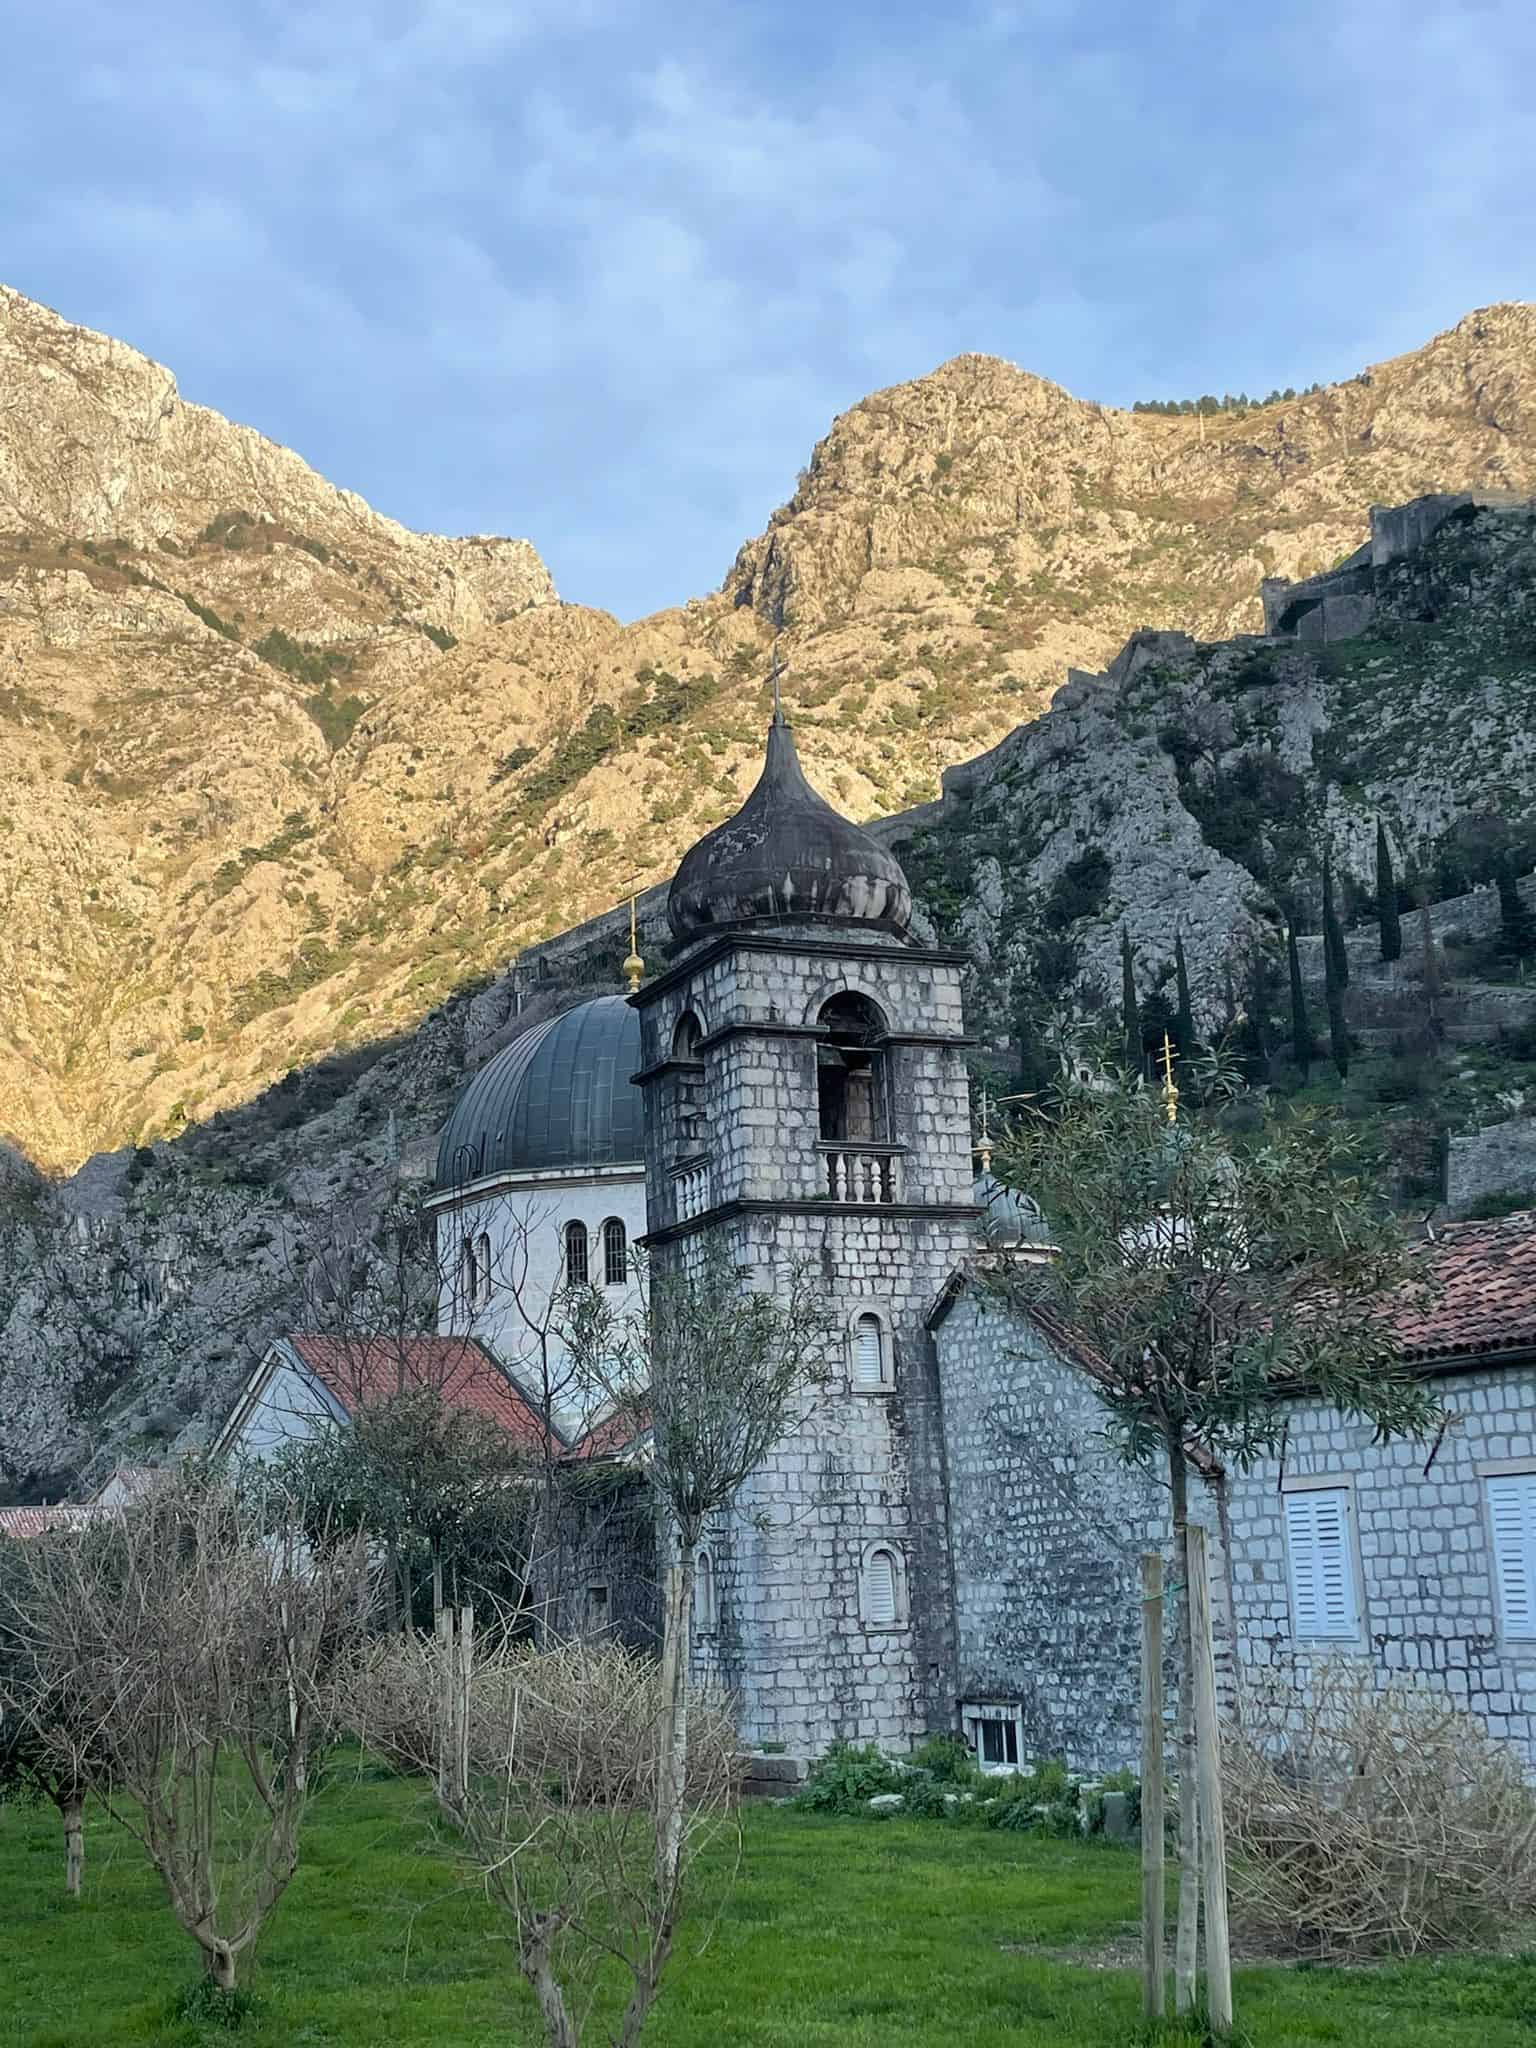 A cathedral in Kotor's Old Town (Montenegro) with mountains in the background and grass in the foreground